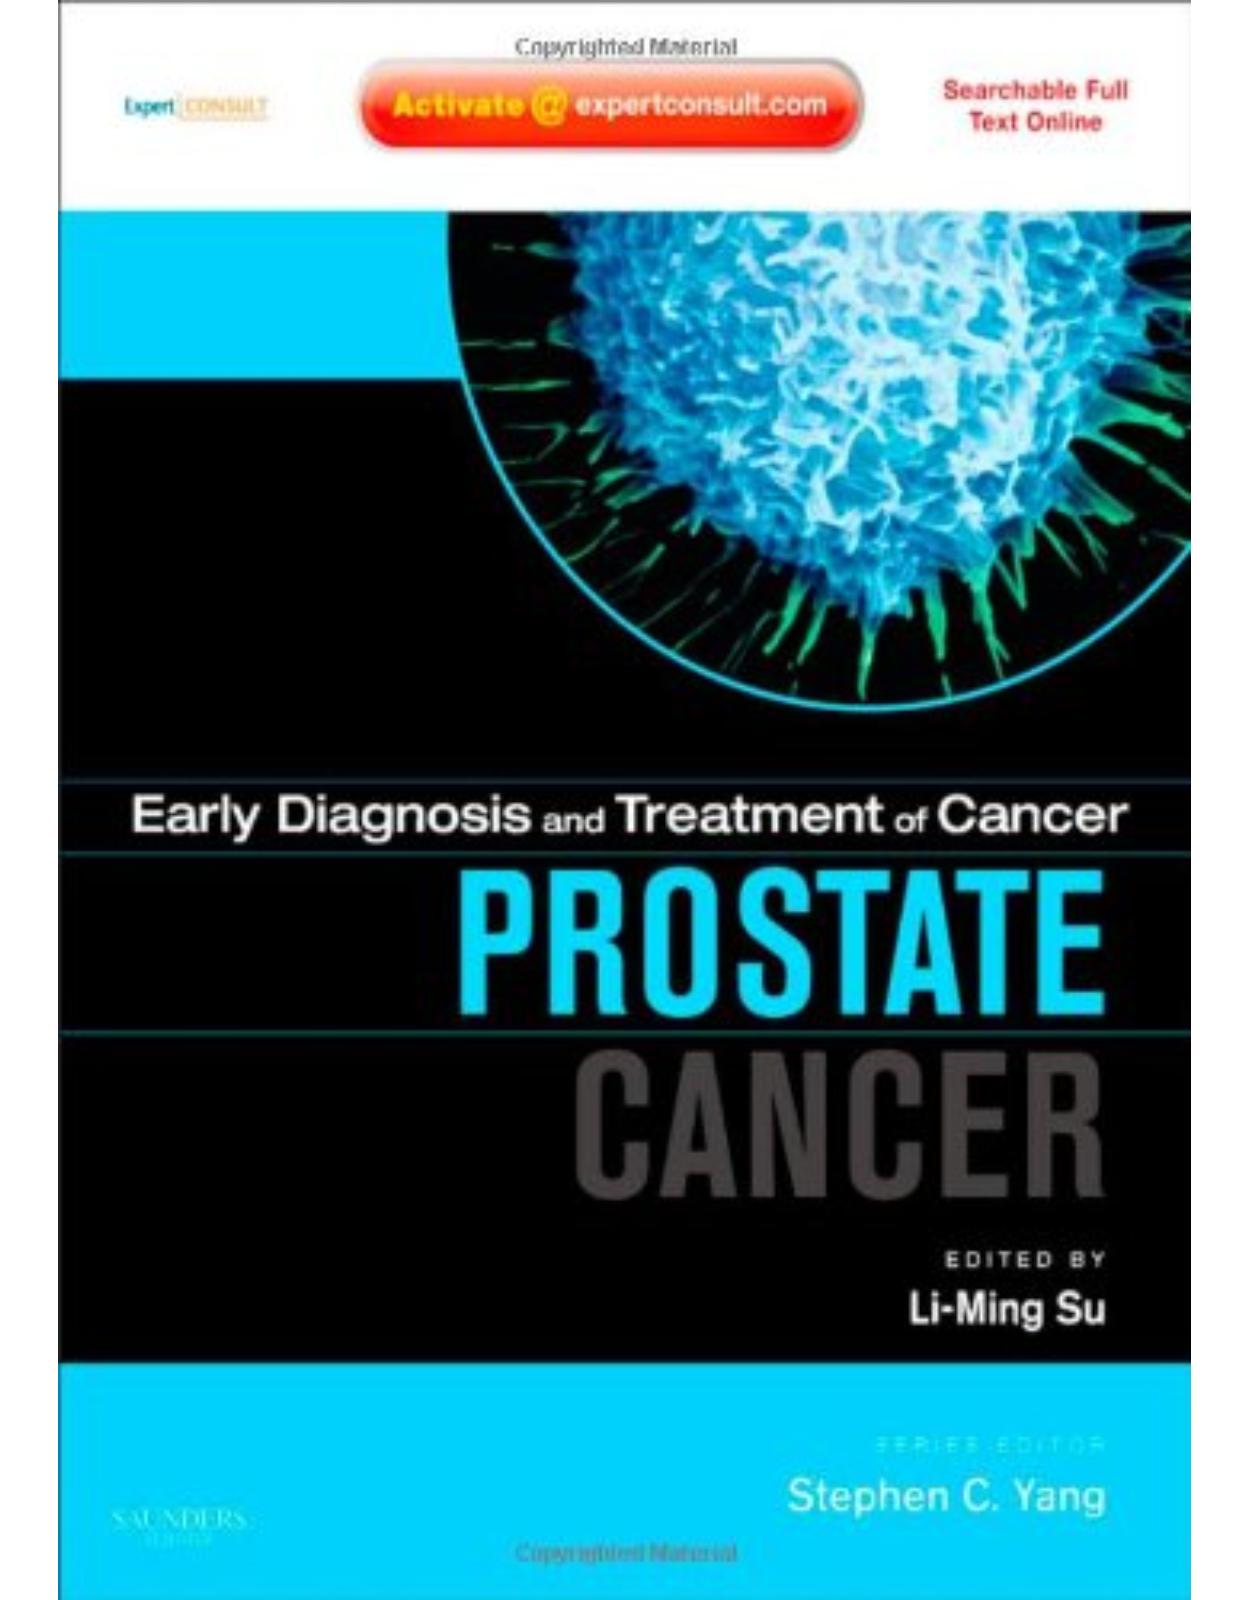 Early Diagnosis and Treatment of Cancer Series: Prostate Cancer: Expert Consult - Online and Print, 1e